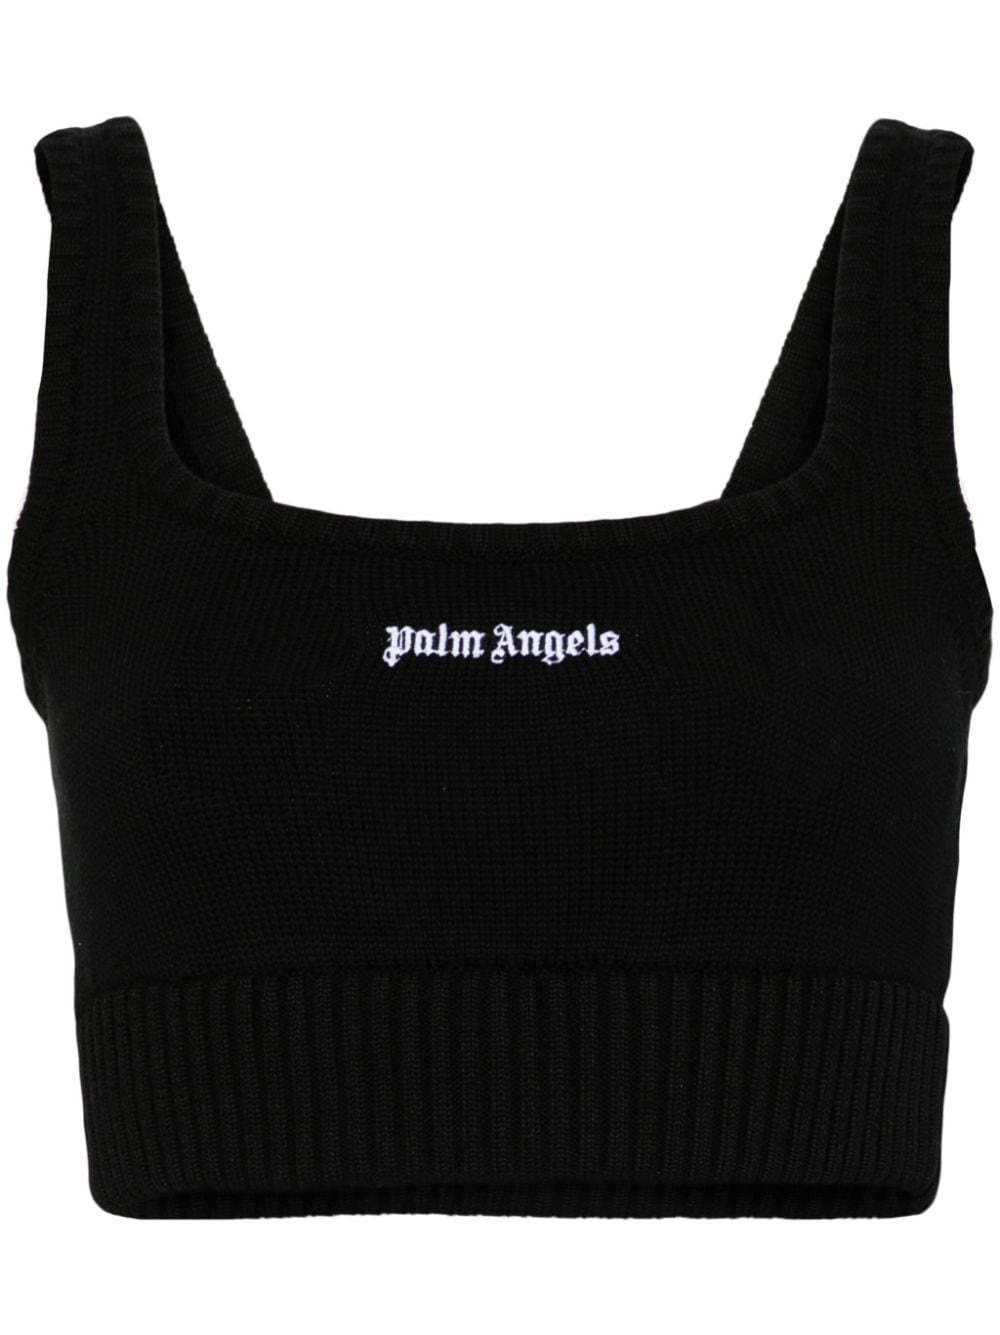 embroidered-logo knit tank top-1